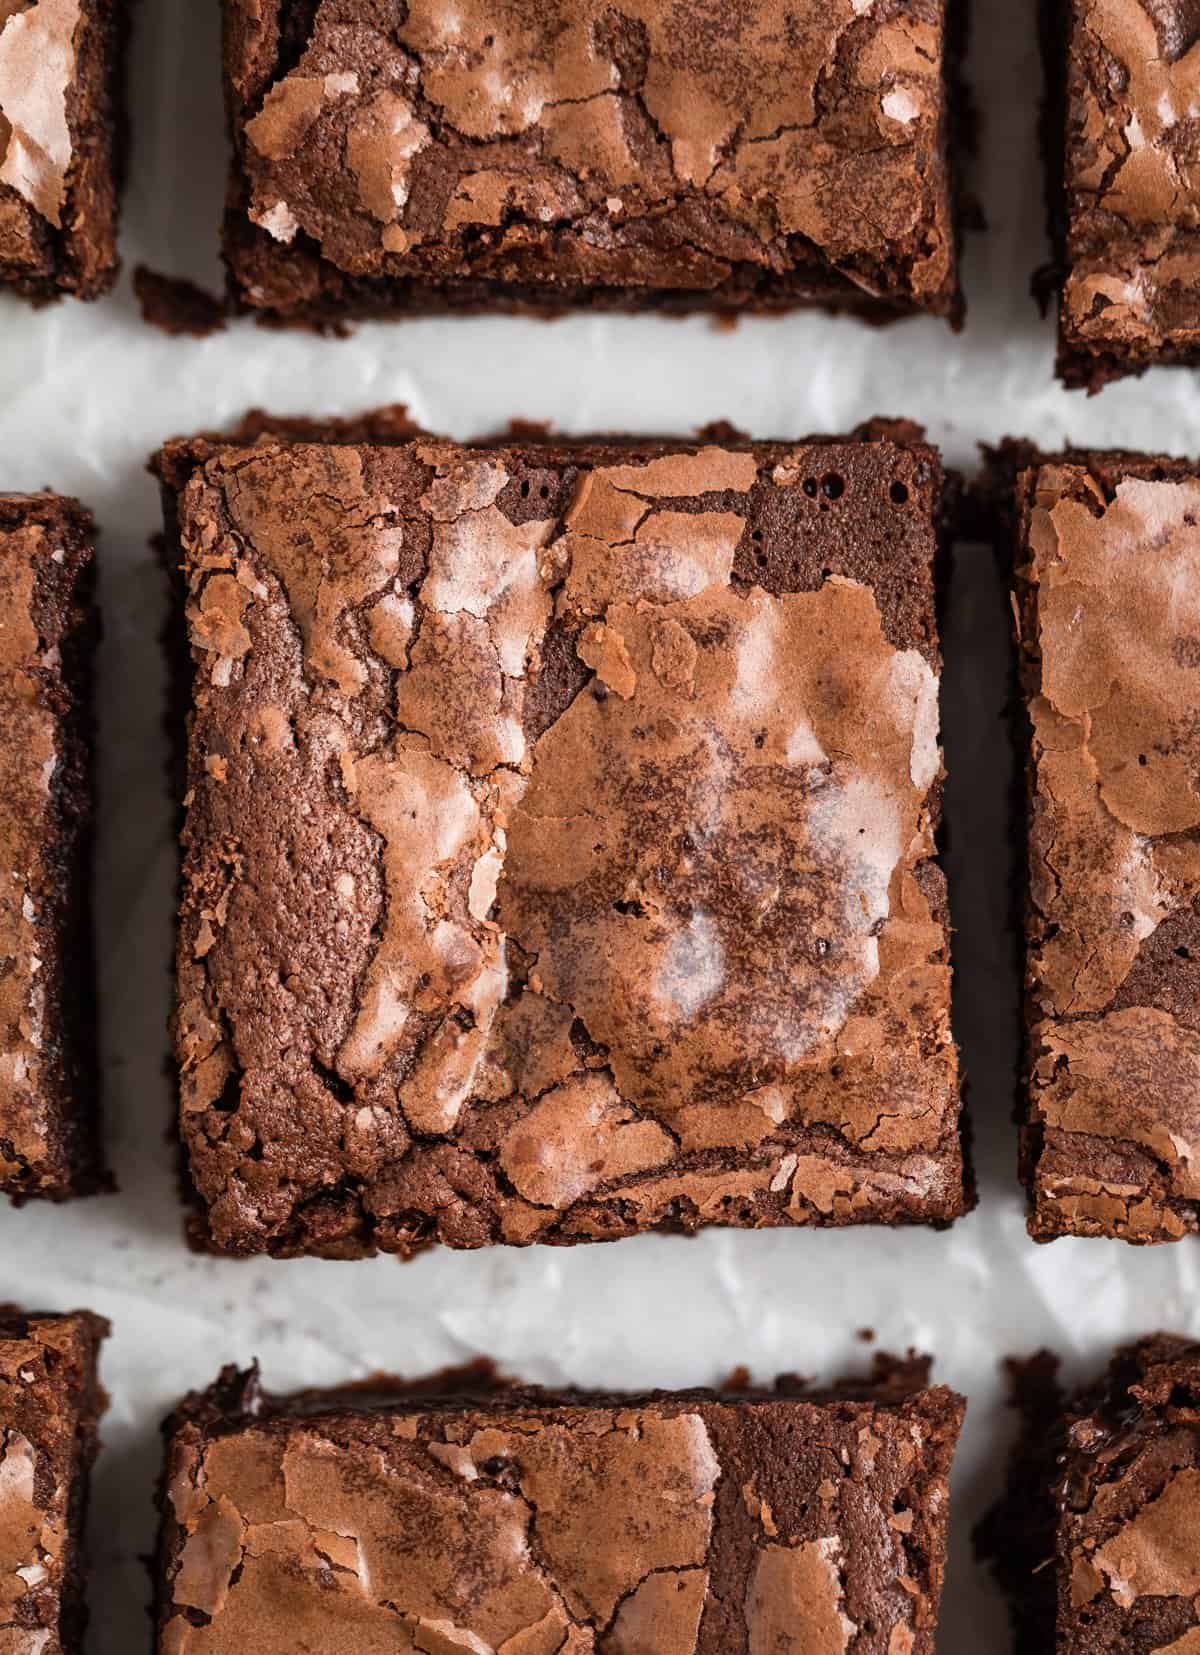 Condensed brownies sliced and lined up on parchment.